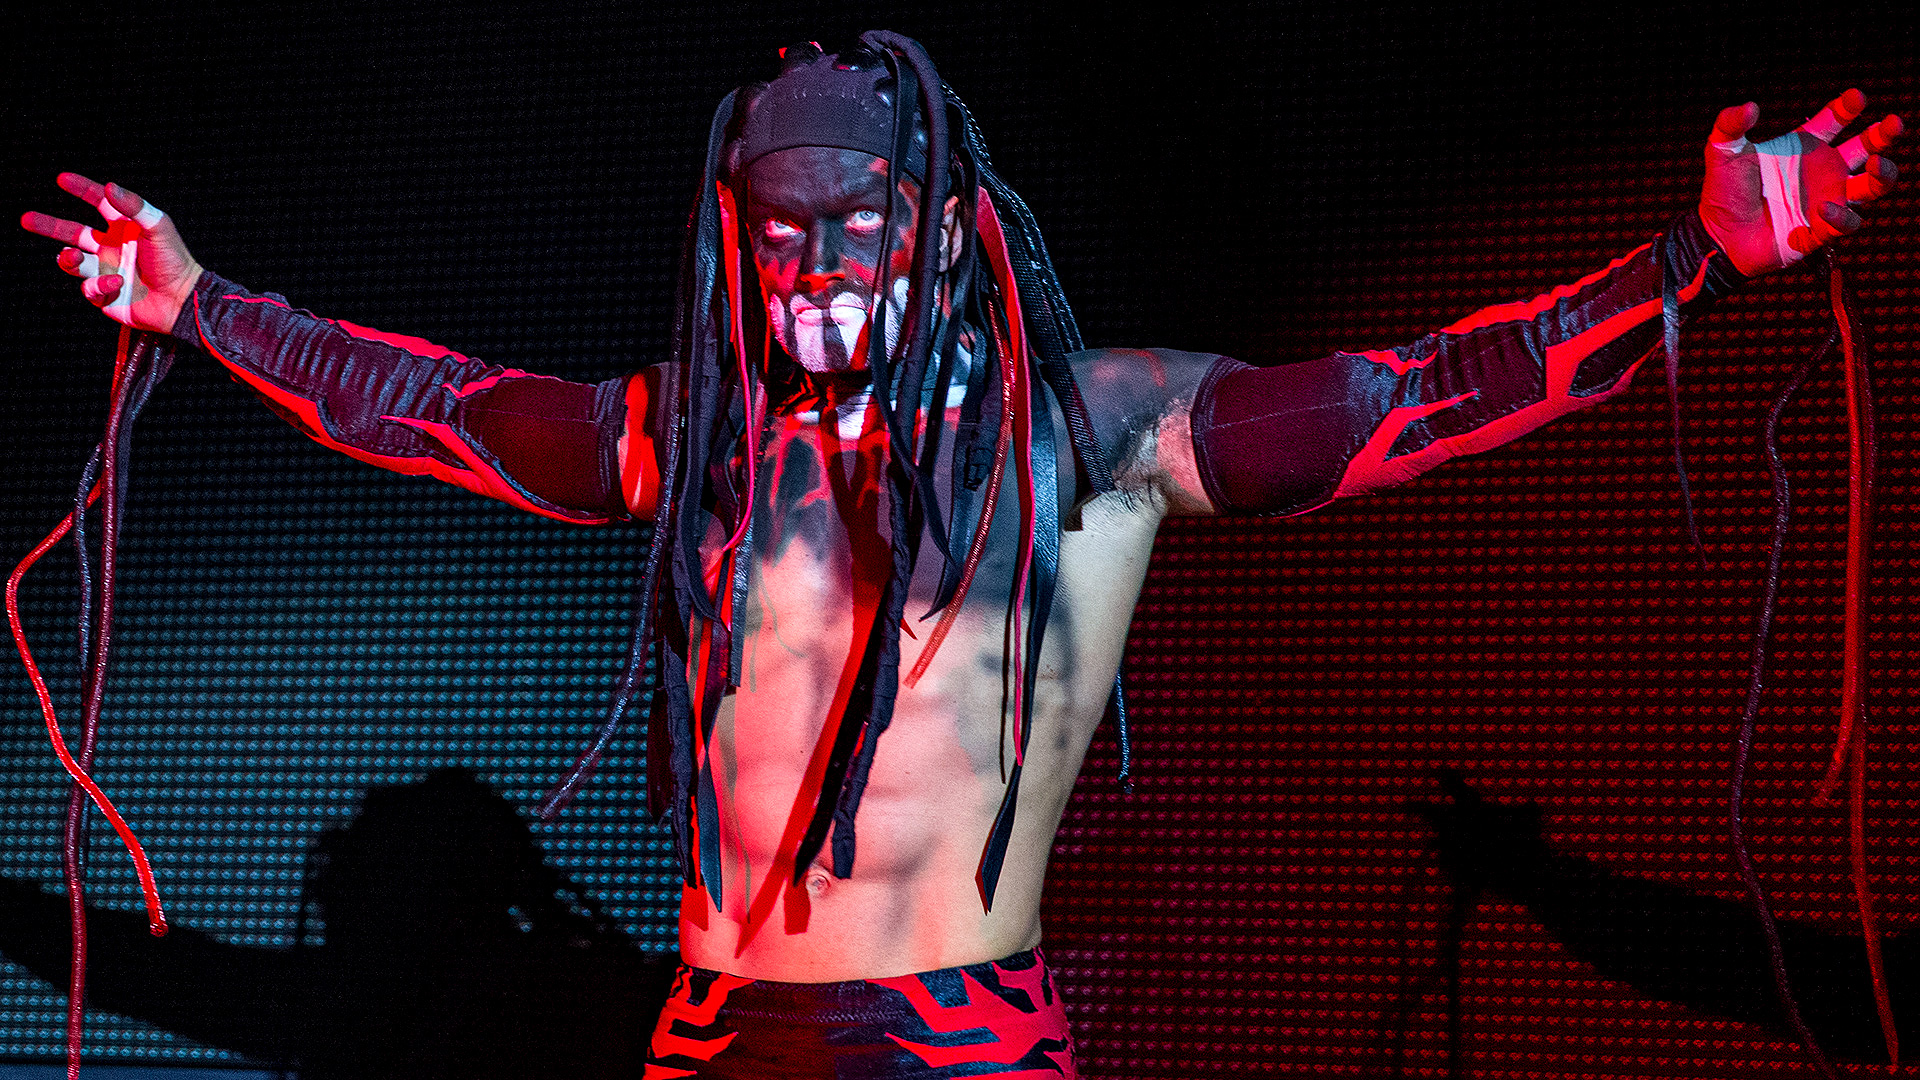 Finn Balor On Why The Recent WWE Releases Will Be Good For Some Of The Wres...